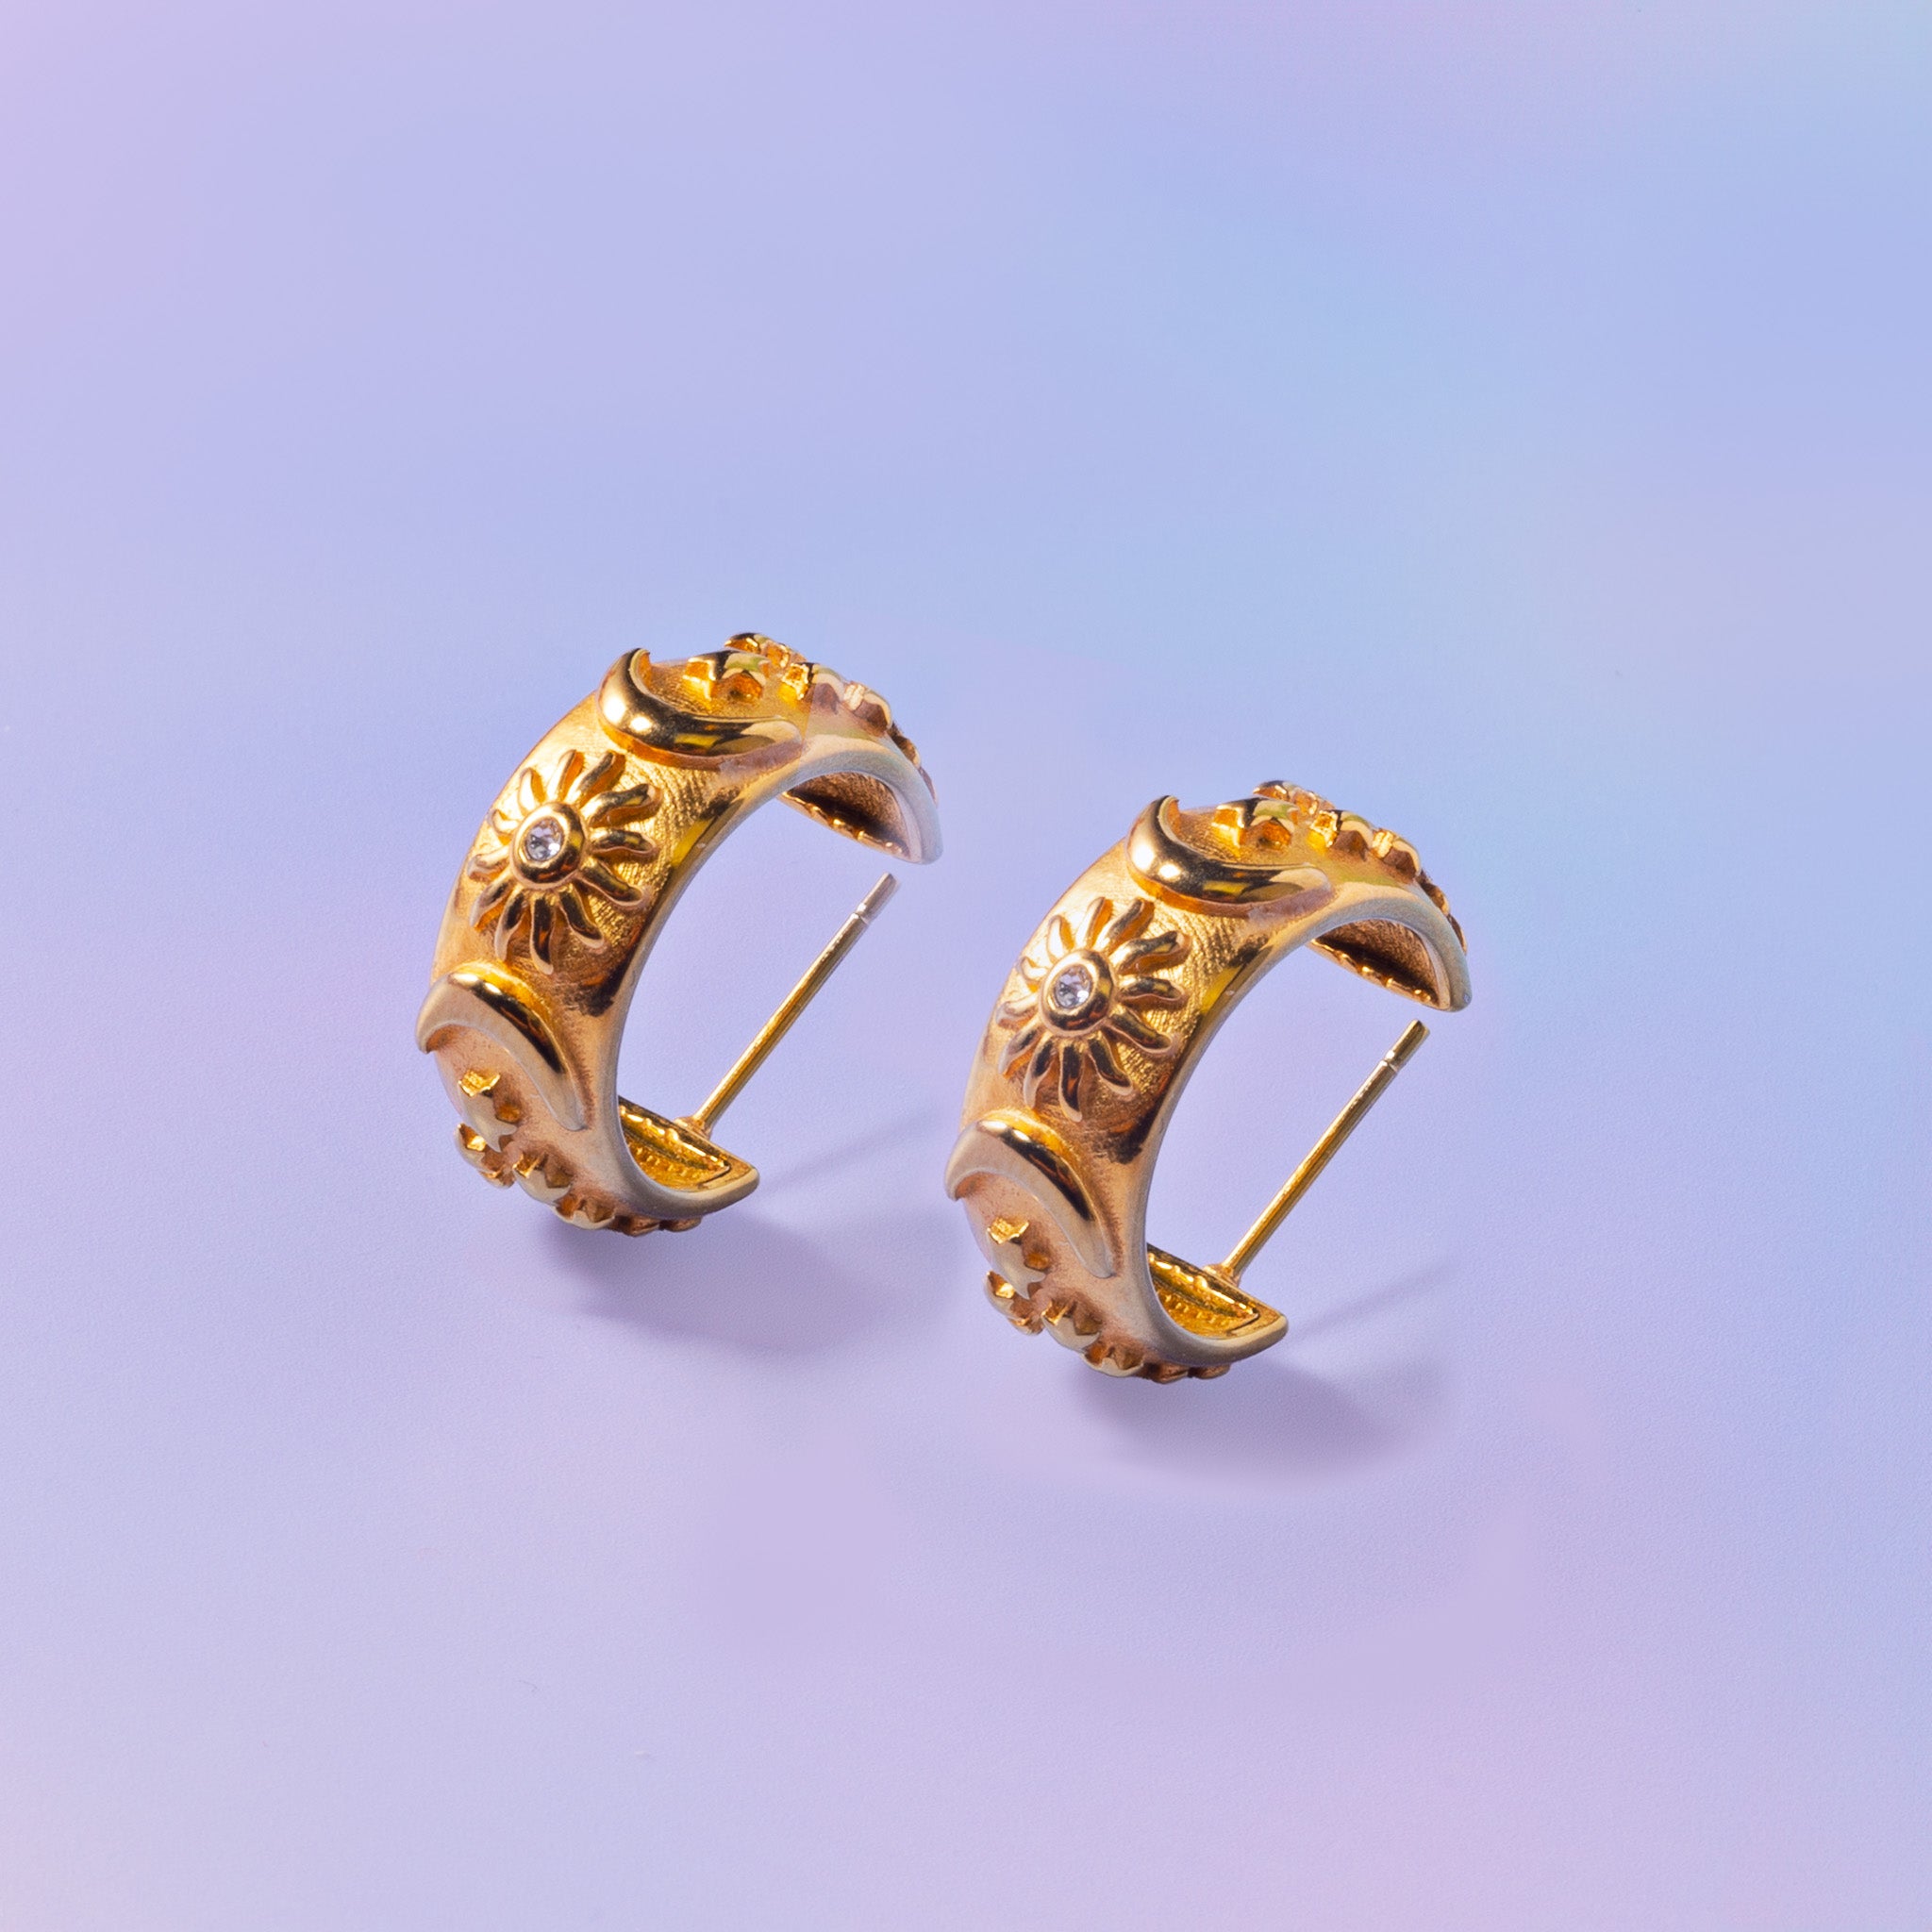 a pair of gold earrings on a blue background